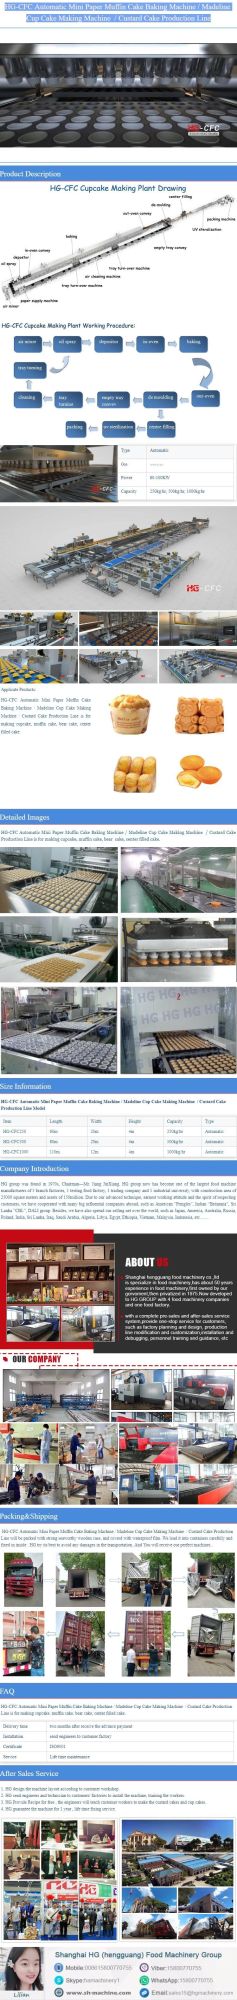 Cookie Snacks Muffin Processing Line Cup Custard Cake Make Baking Oven Food Stainless Steel Bakery Machine